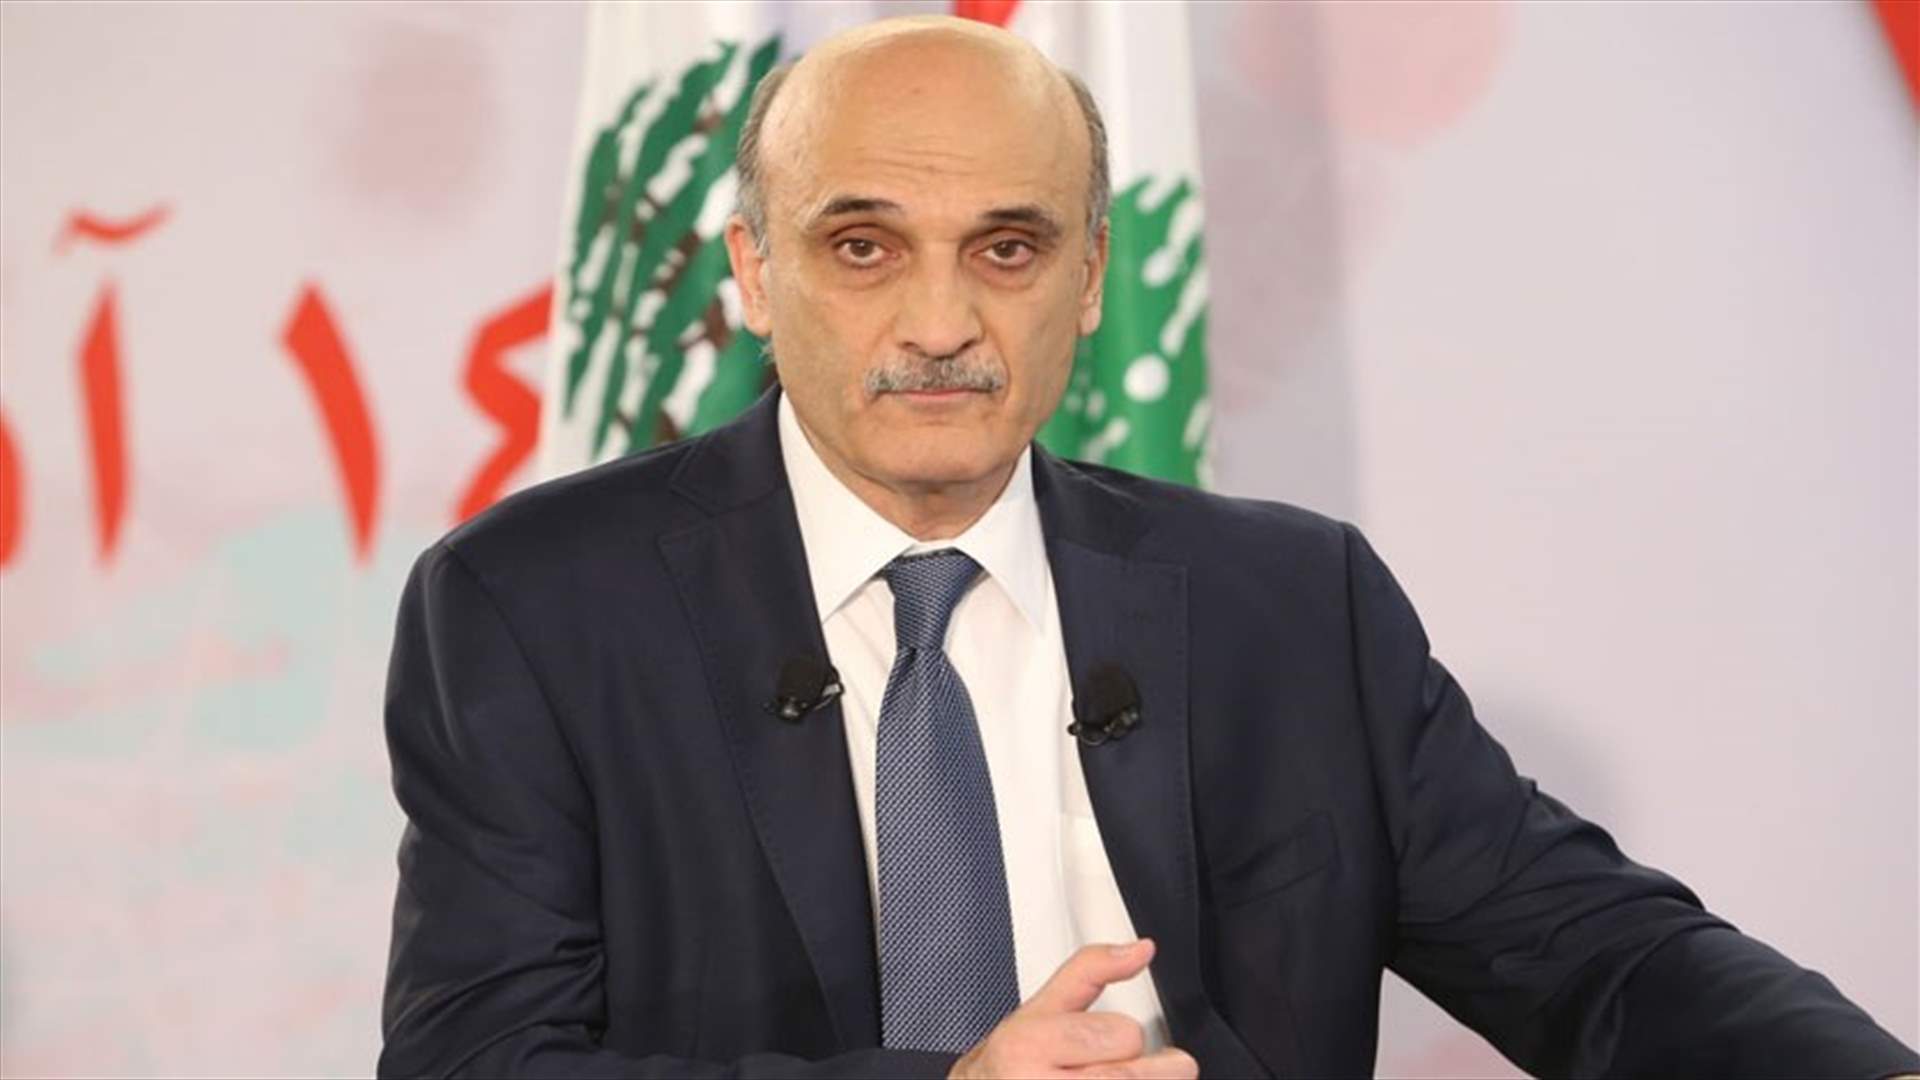 Geagea says LF does not put veto on any party’s participation in Cabinet